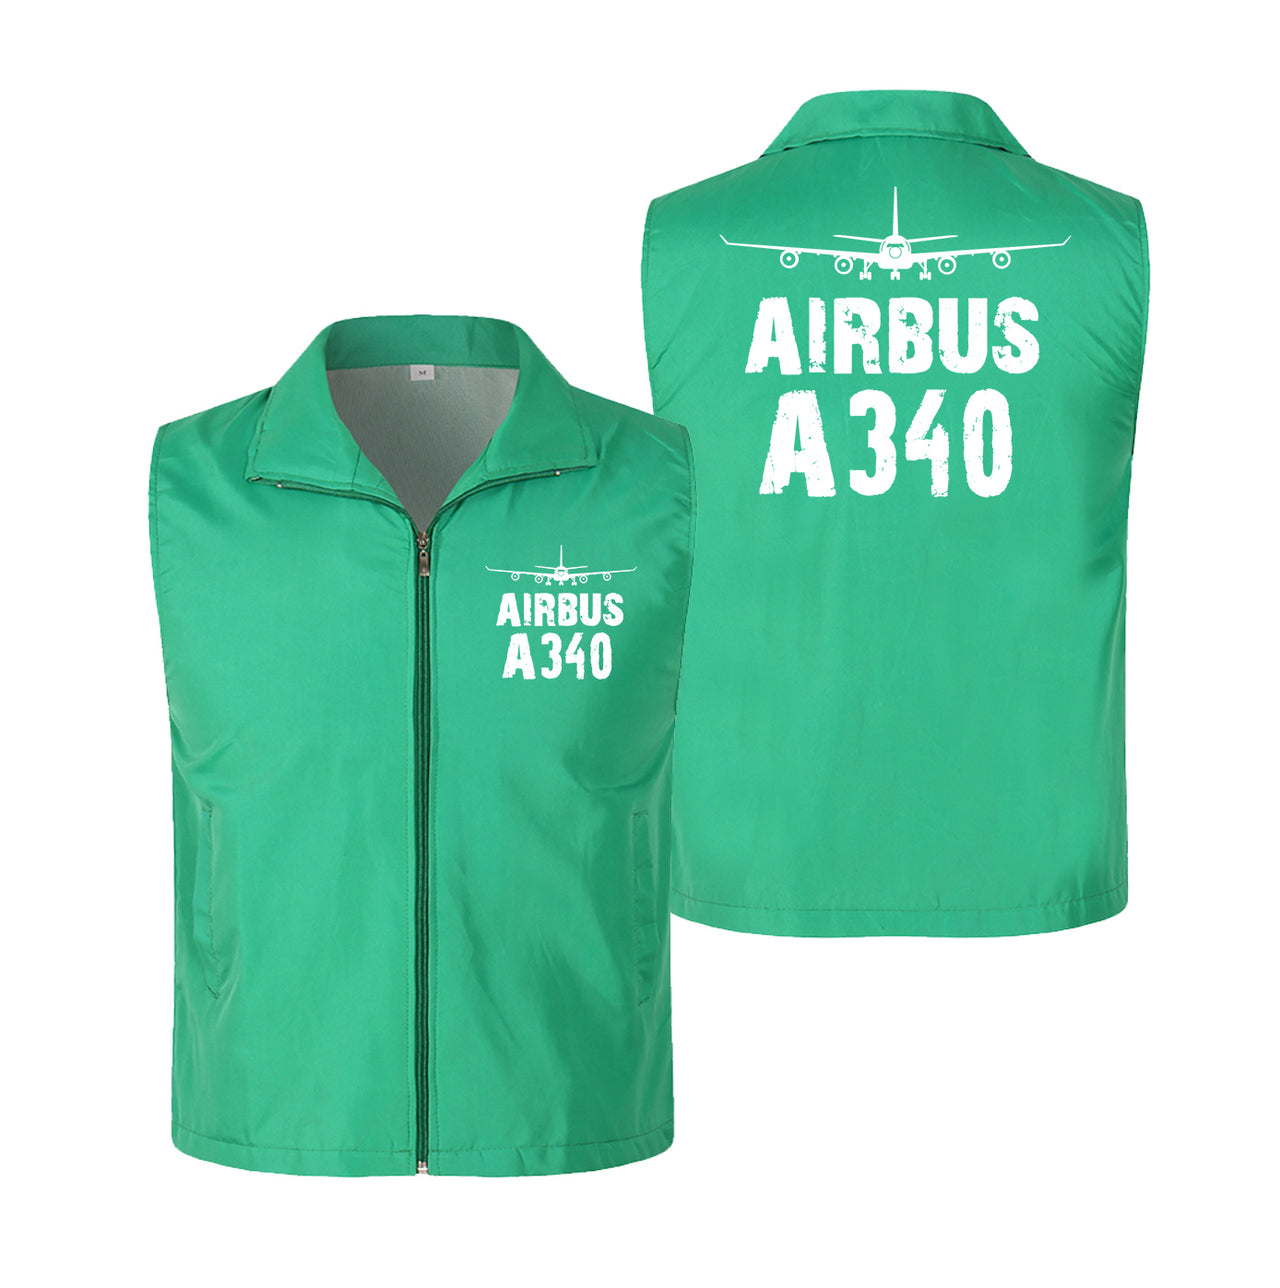 Airbus A340 & Plane Designed Thin Style Vests